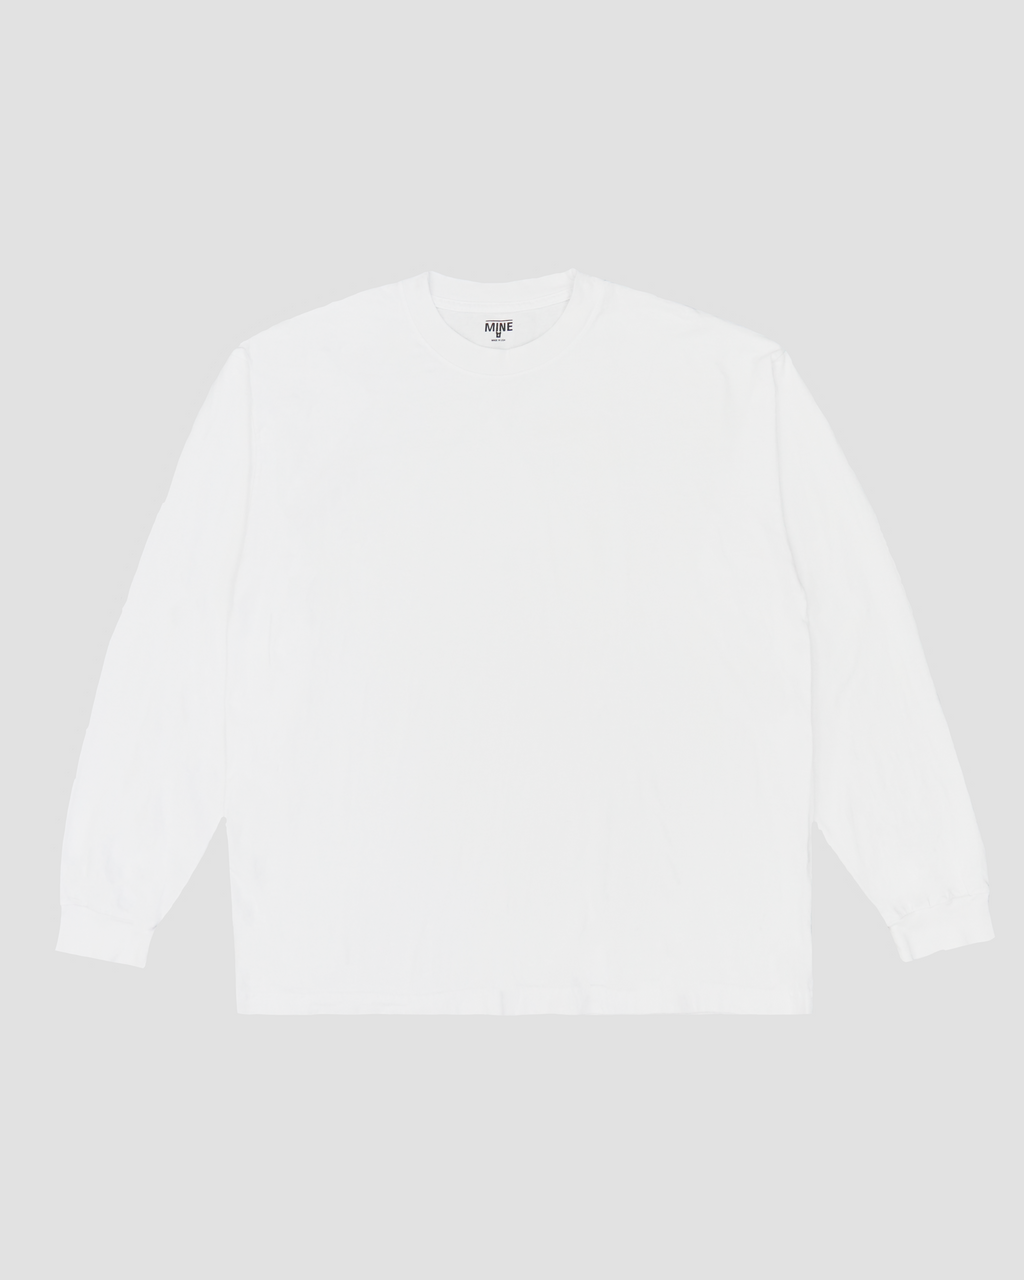 MINE Duct Tape Long Tee / Black Label - White